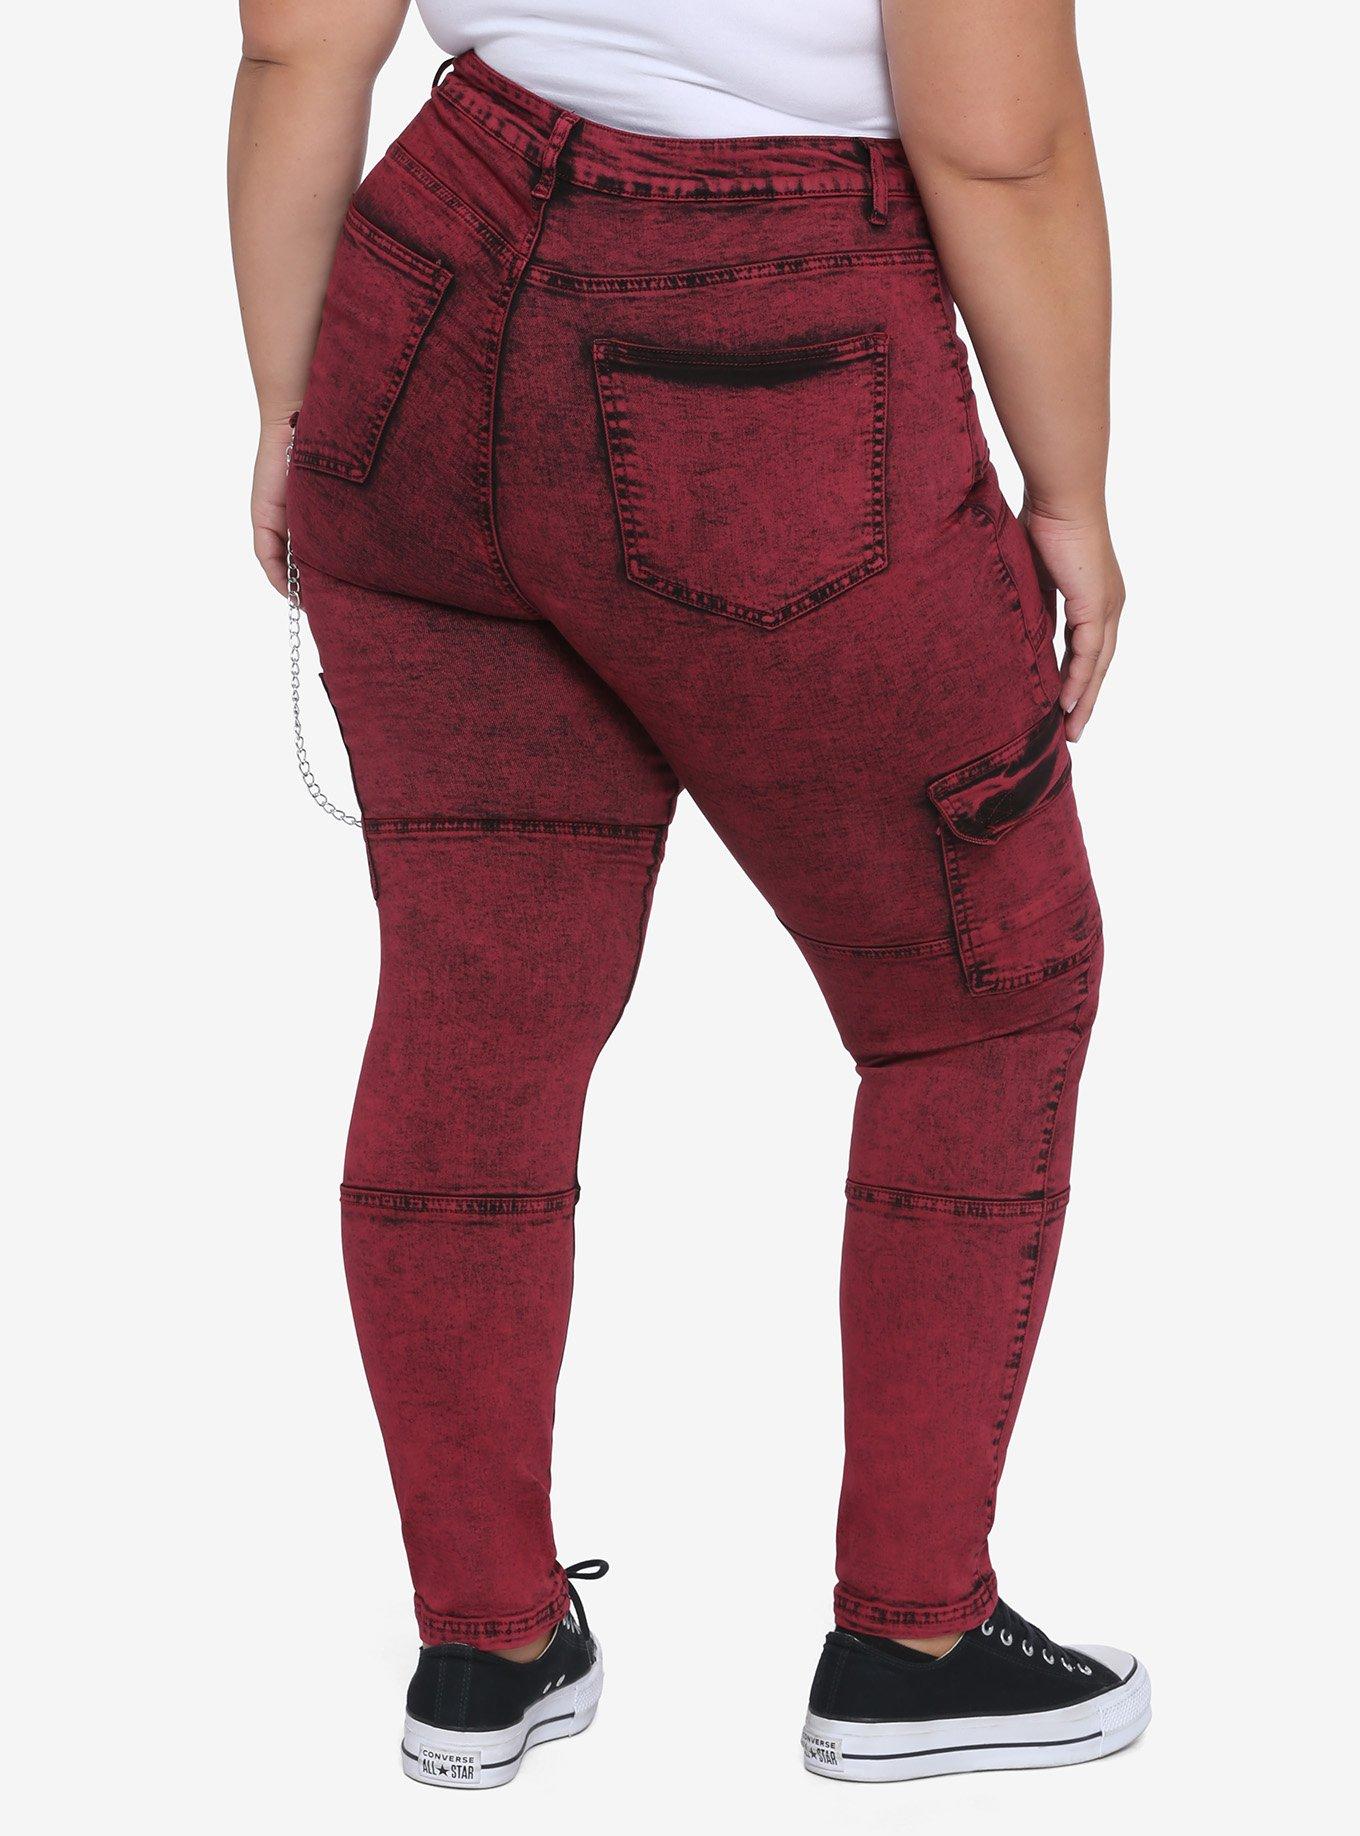 Pockets & Chains Red Washed Skinny Jeans Plus Size, RED, alternate